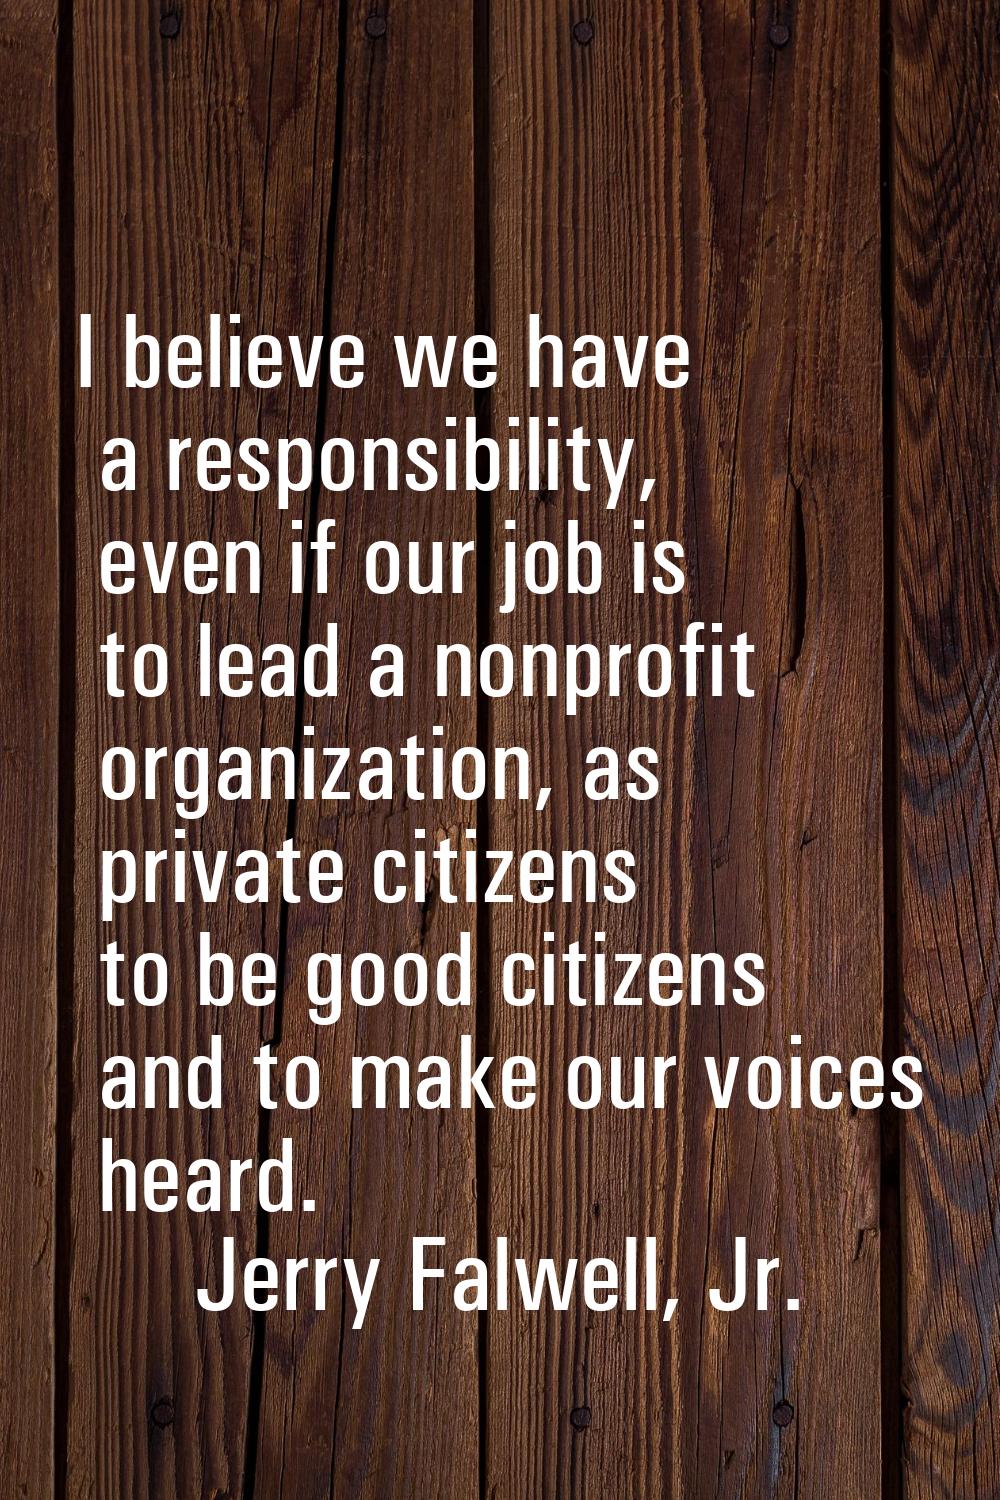 I believe we have a responsibility, even if our job is to lead a nonprofit organization, as private